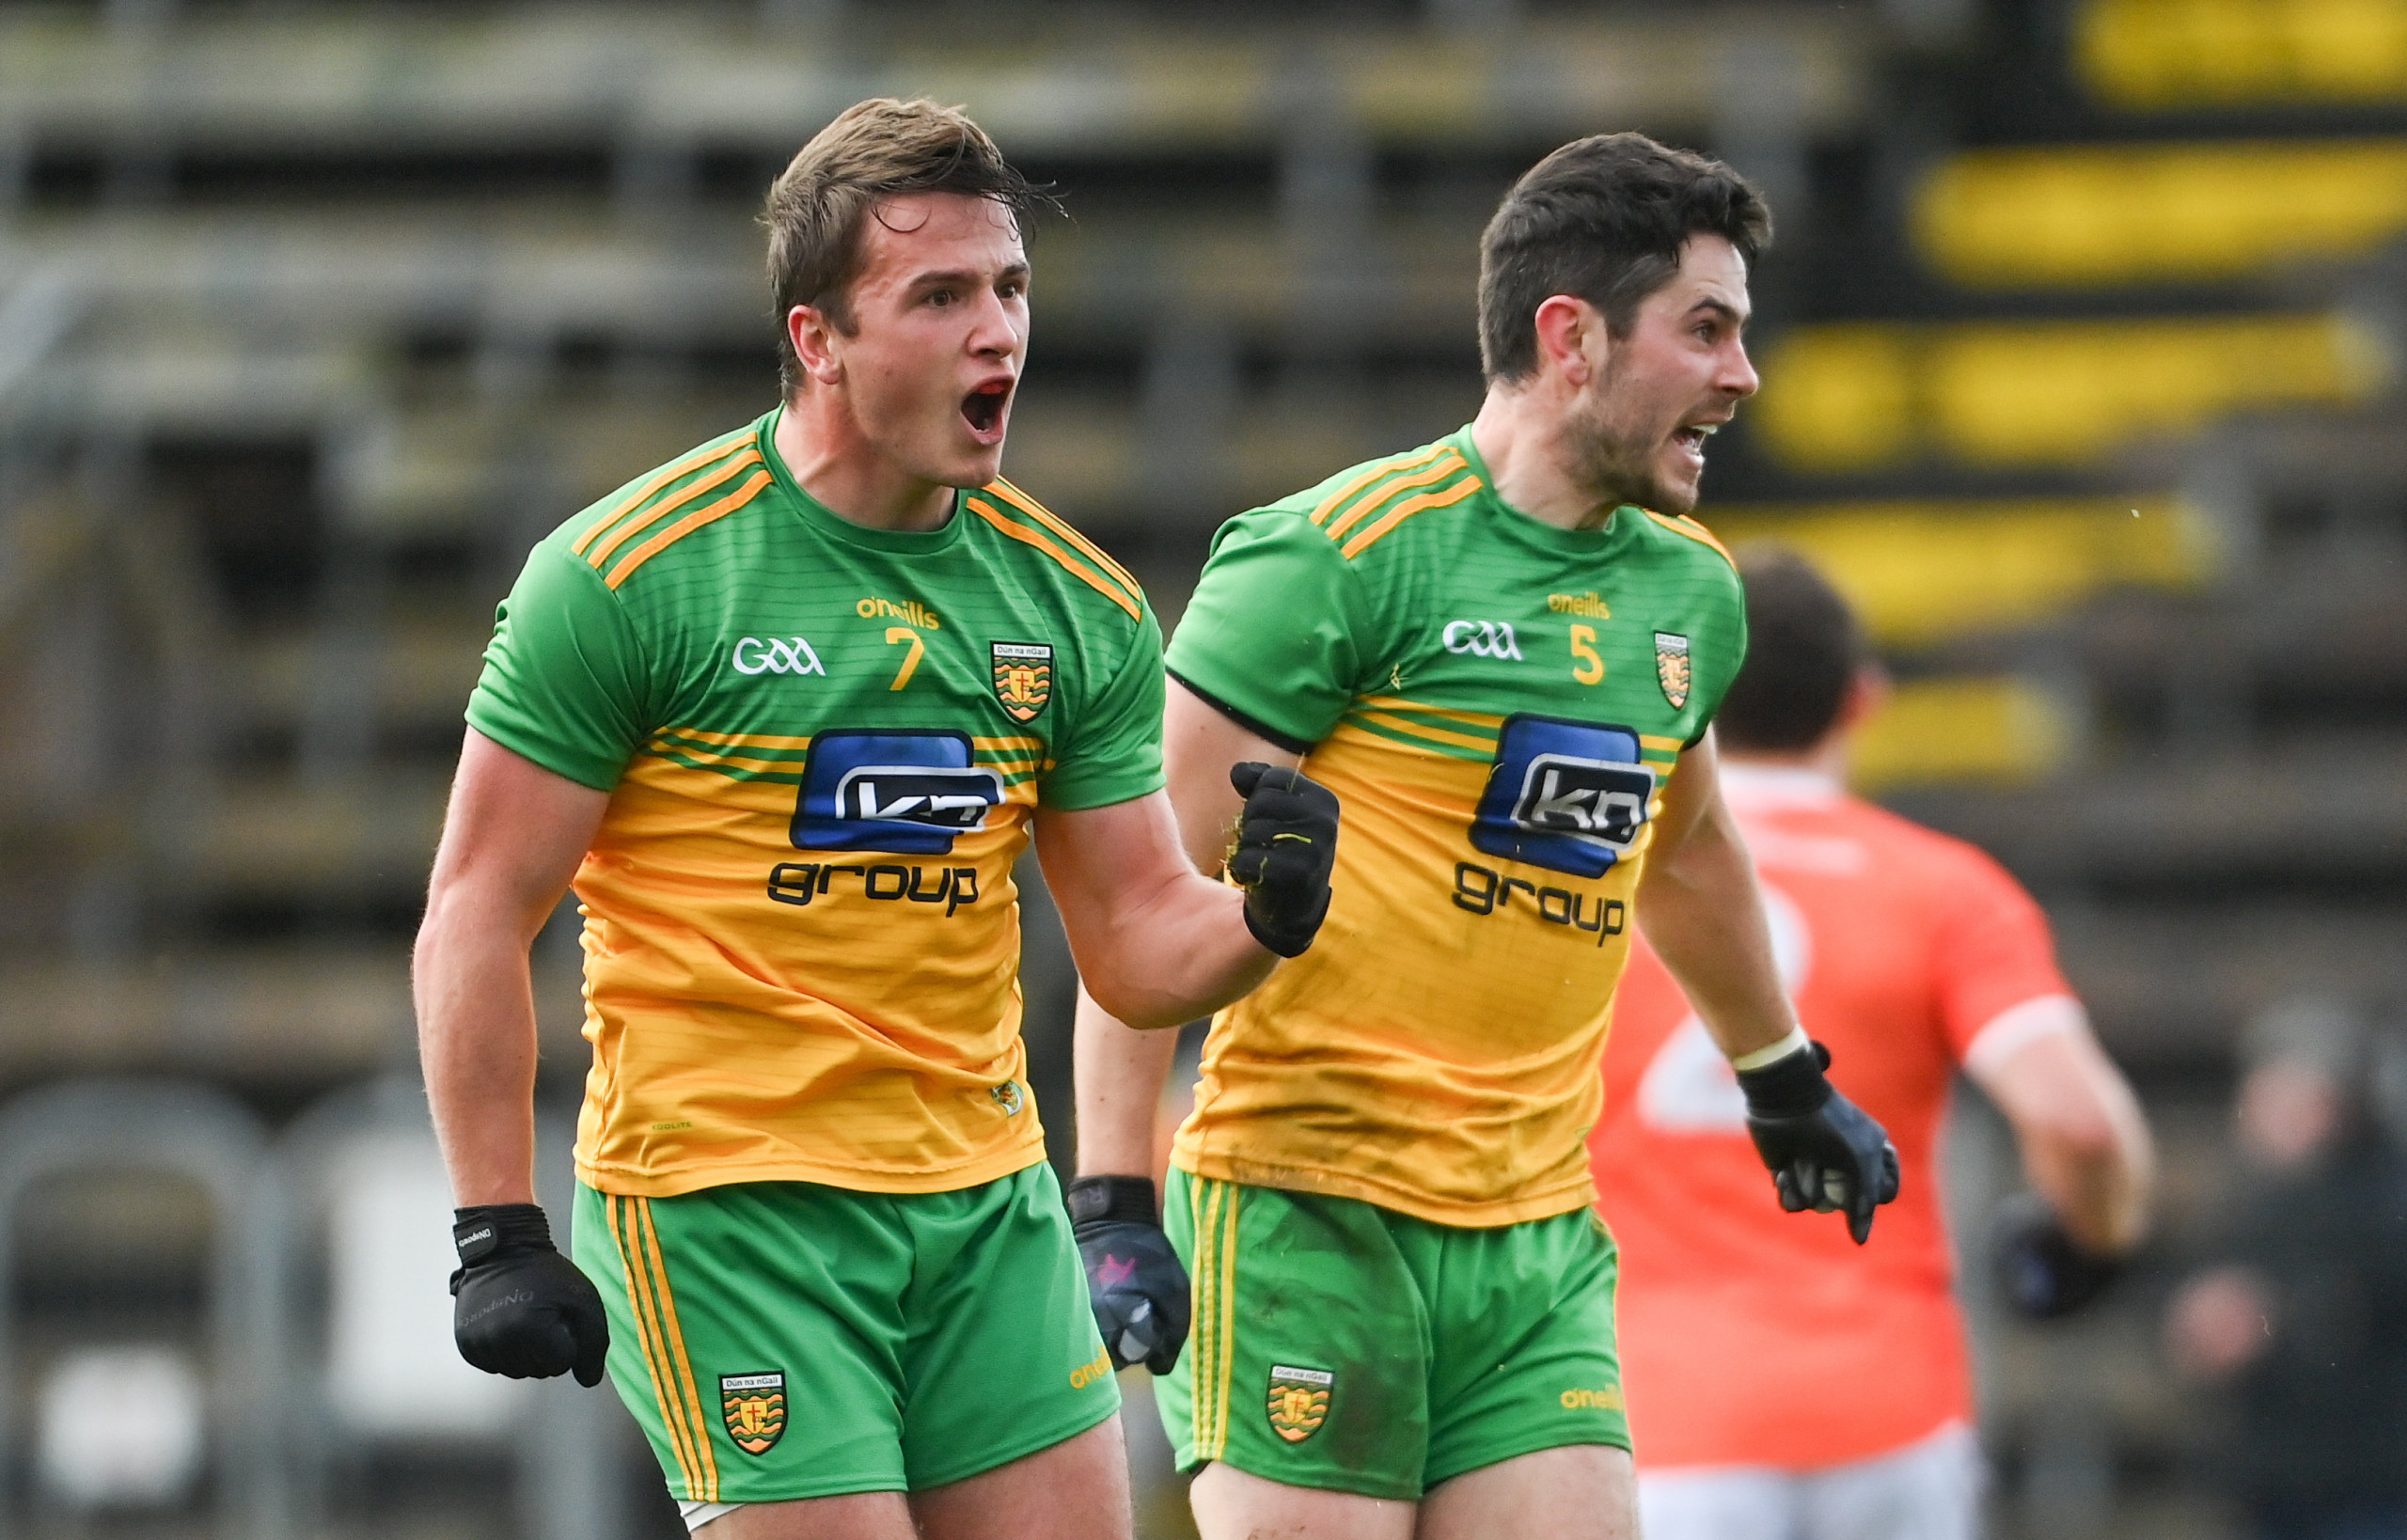 REPORT: Dominant Donegal progress to Ulster final